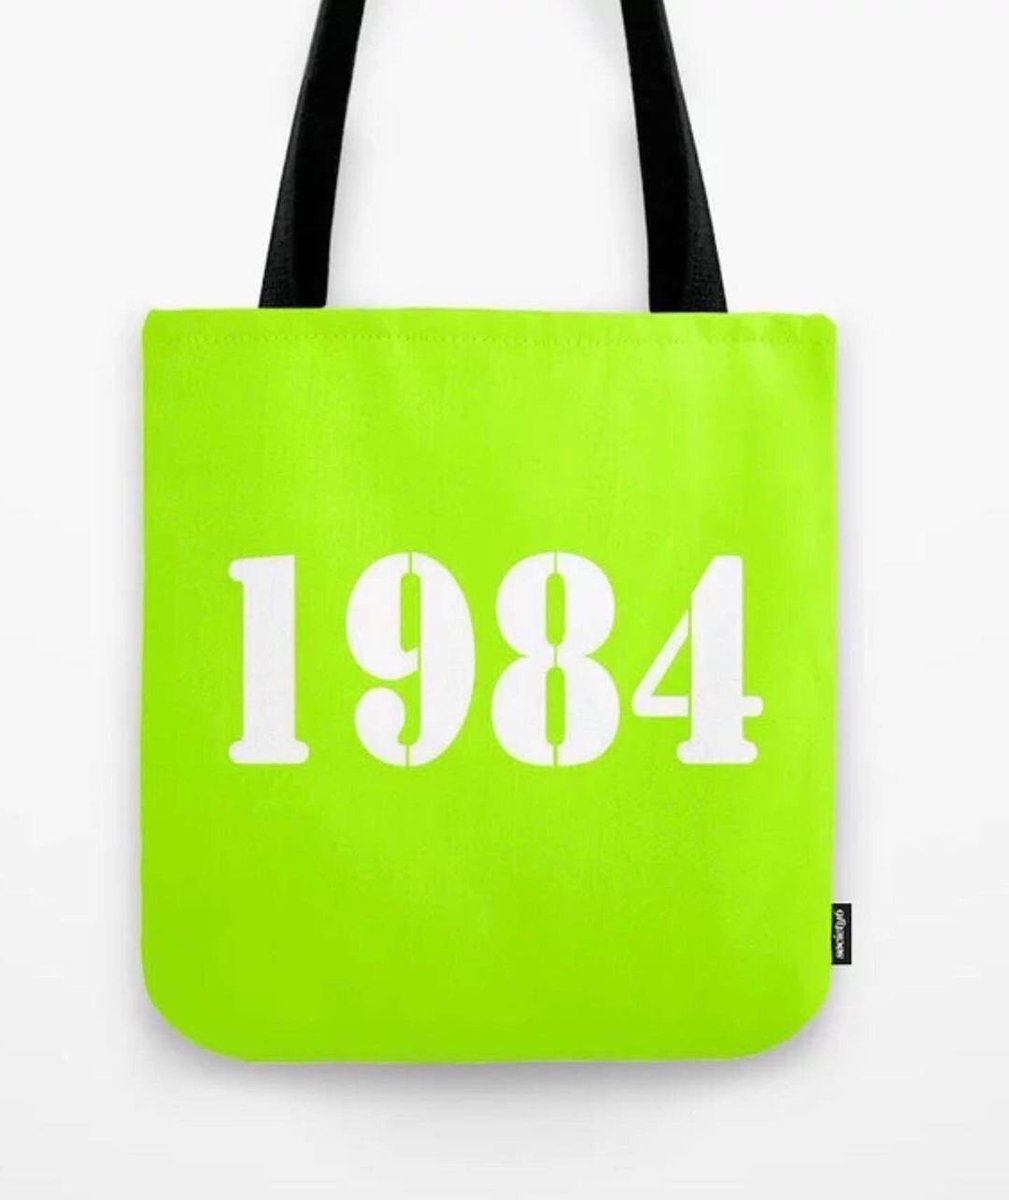 ⭐️1984⭐️

A couple of the many products available in this print.

Society6.com/wankerandwanker 

#1984 #nineteeneightyfour #life #love #sale #movie #eurthymics #song #shopping #gift #onlineshopping #shoppingonline #christmas #vintage #film #book #georgeorwell